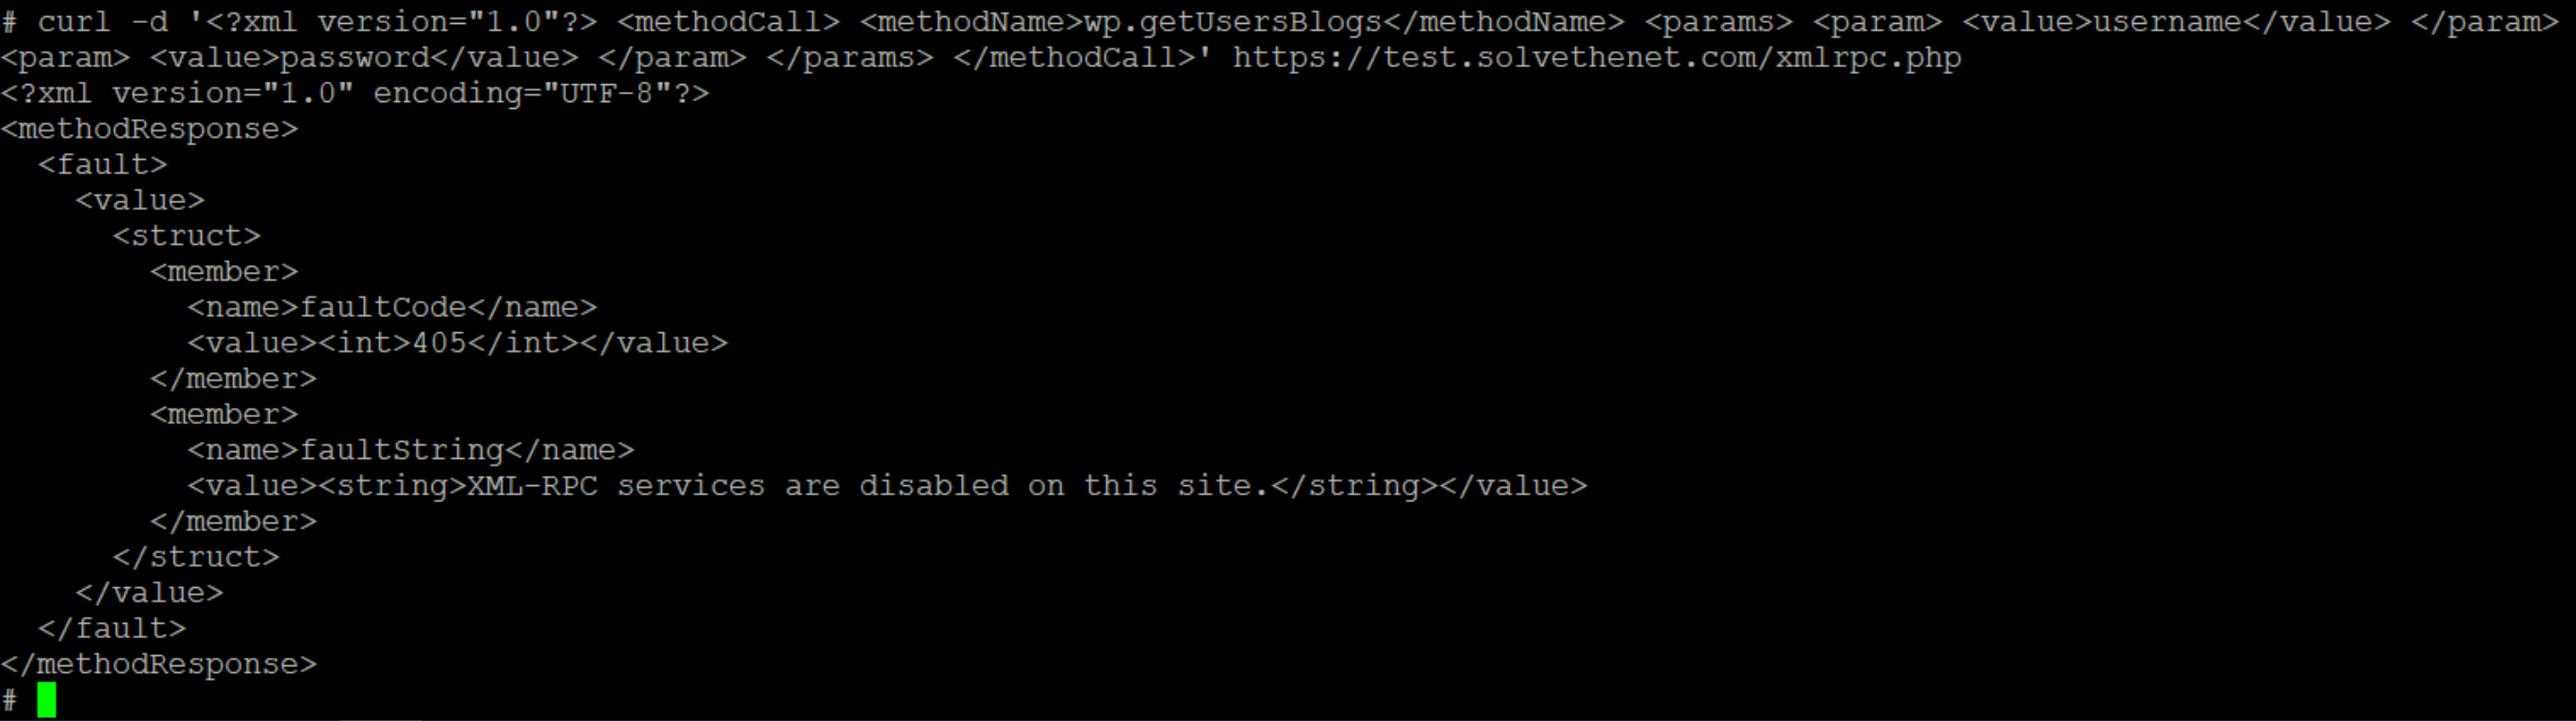 An example of a curl command attempting to request data via XML-RPC calls to the site when the plugin is enabled. The error 